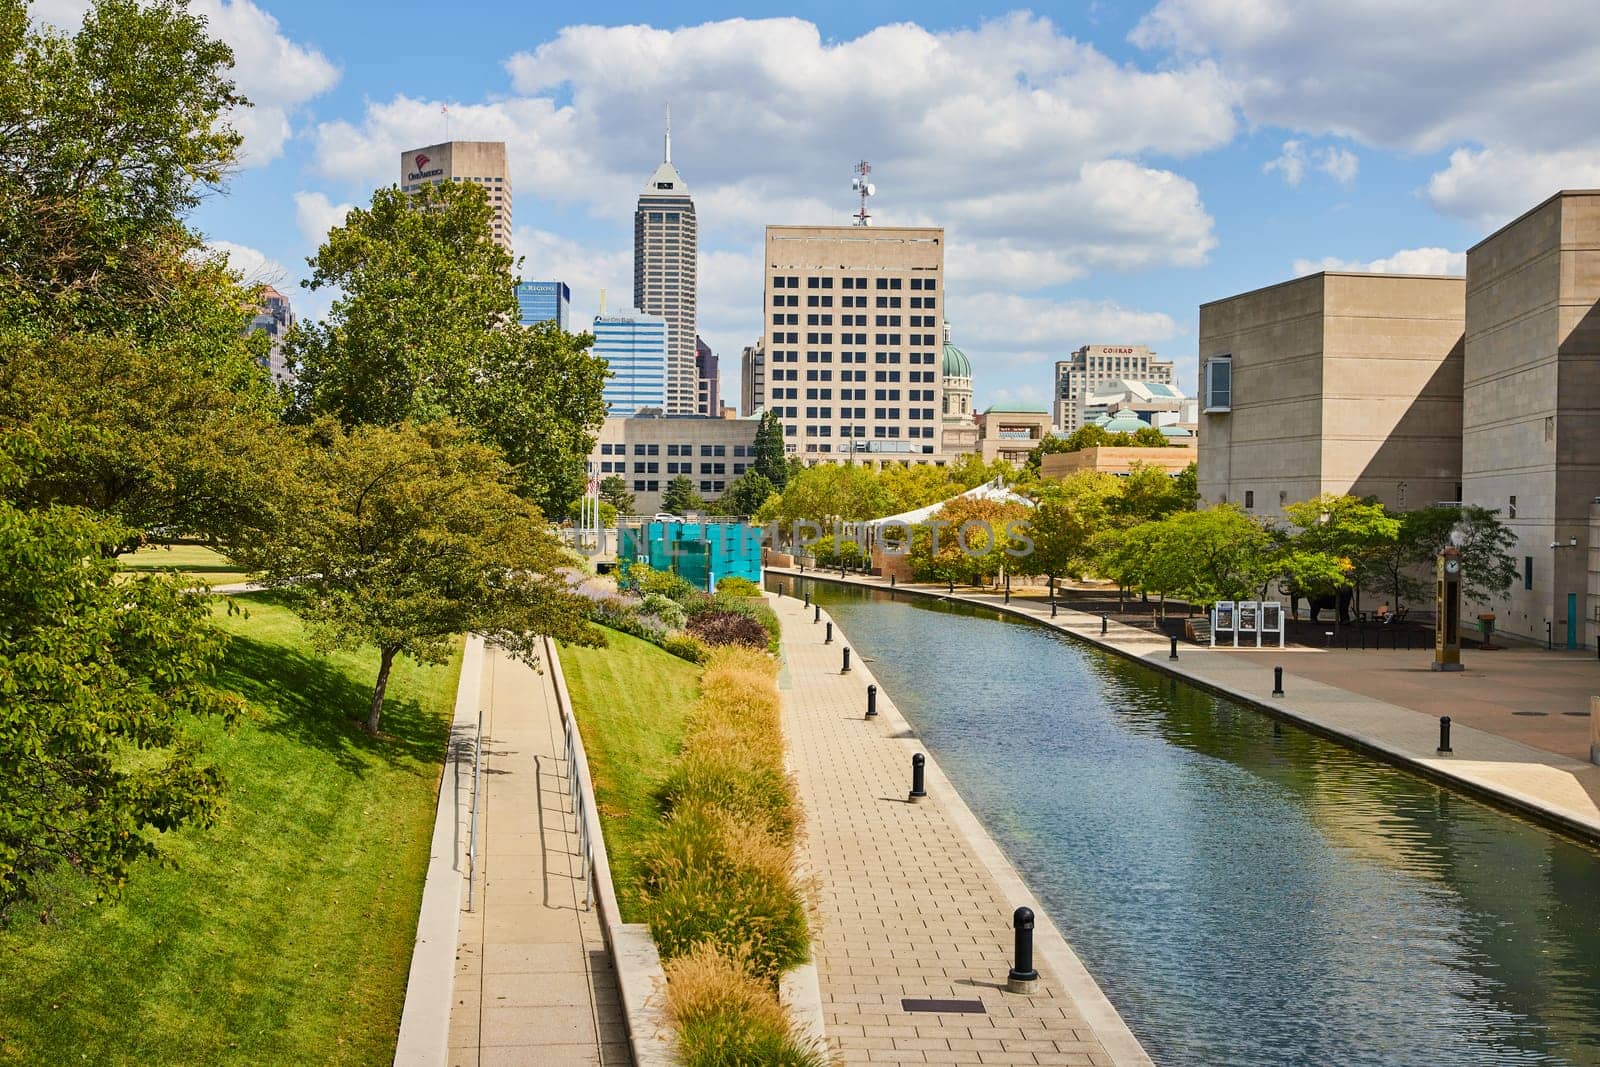 Tranquil Urban Park with Canal in Cityscape, Indianapolis by njproductions